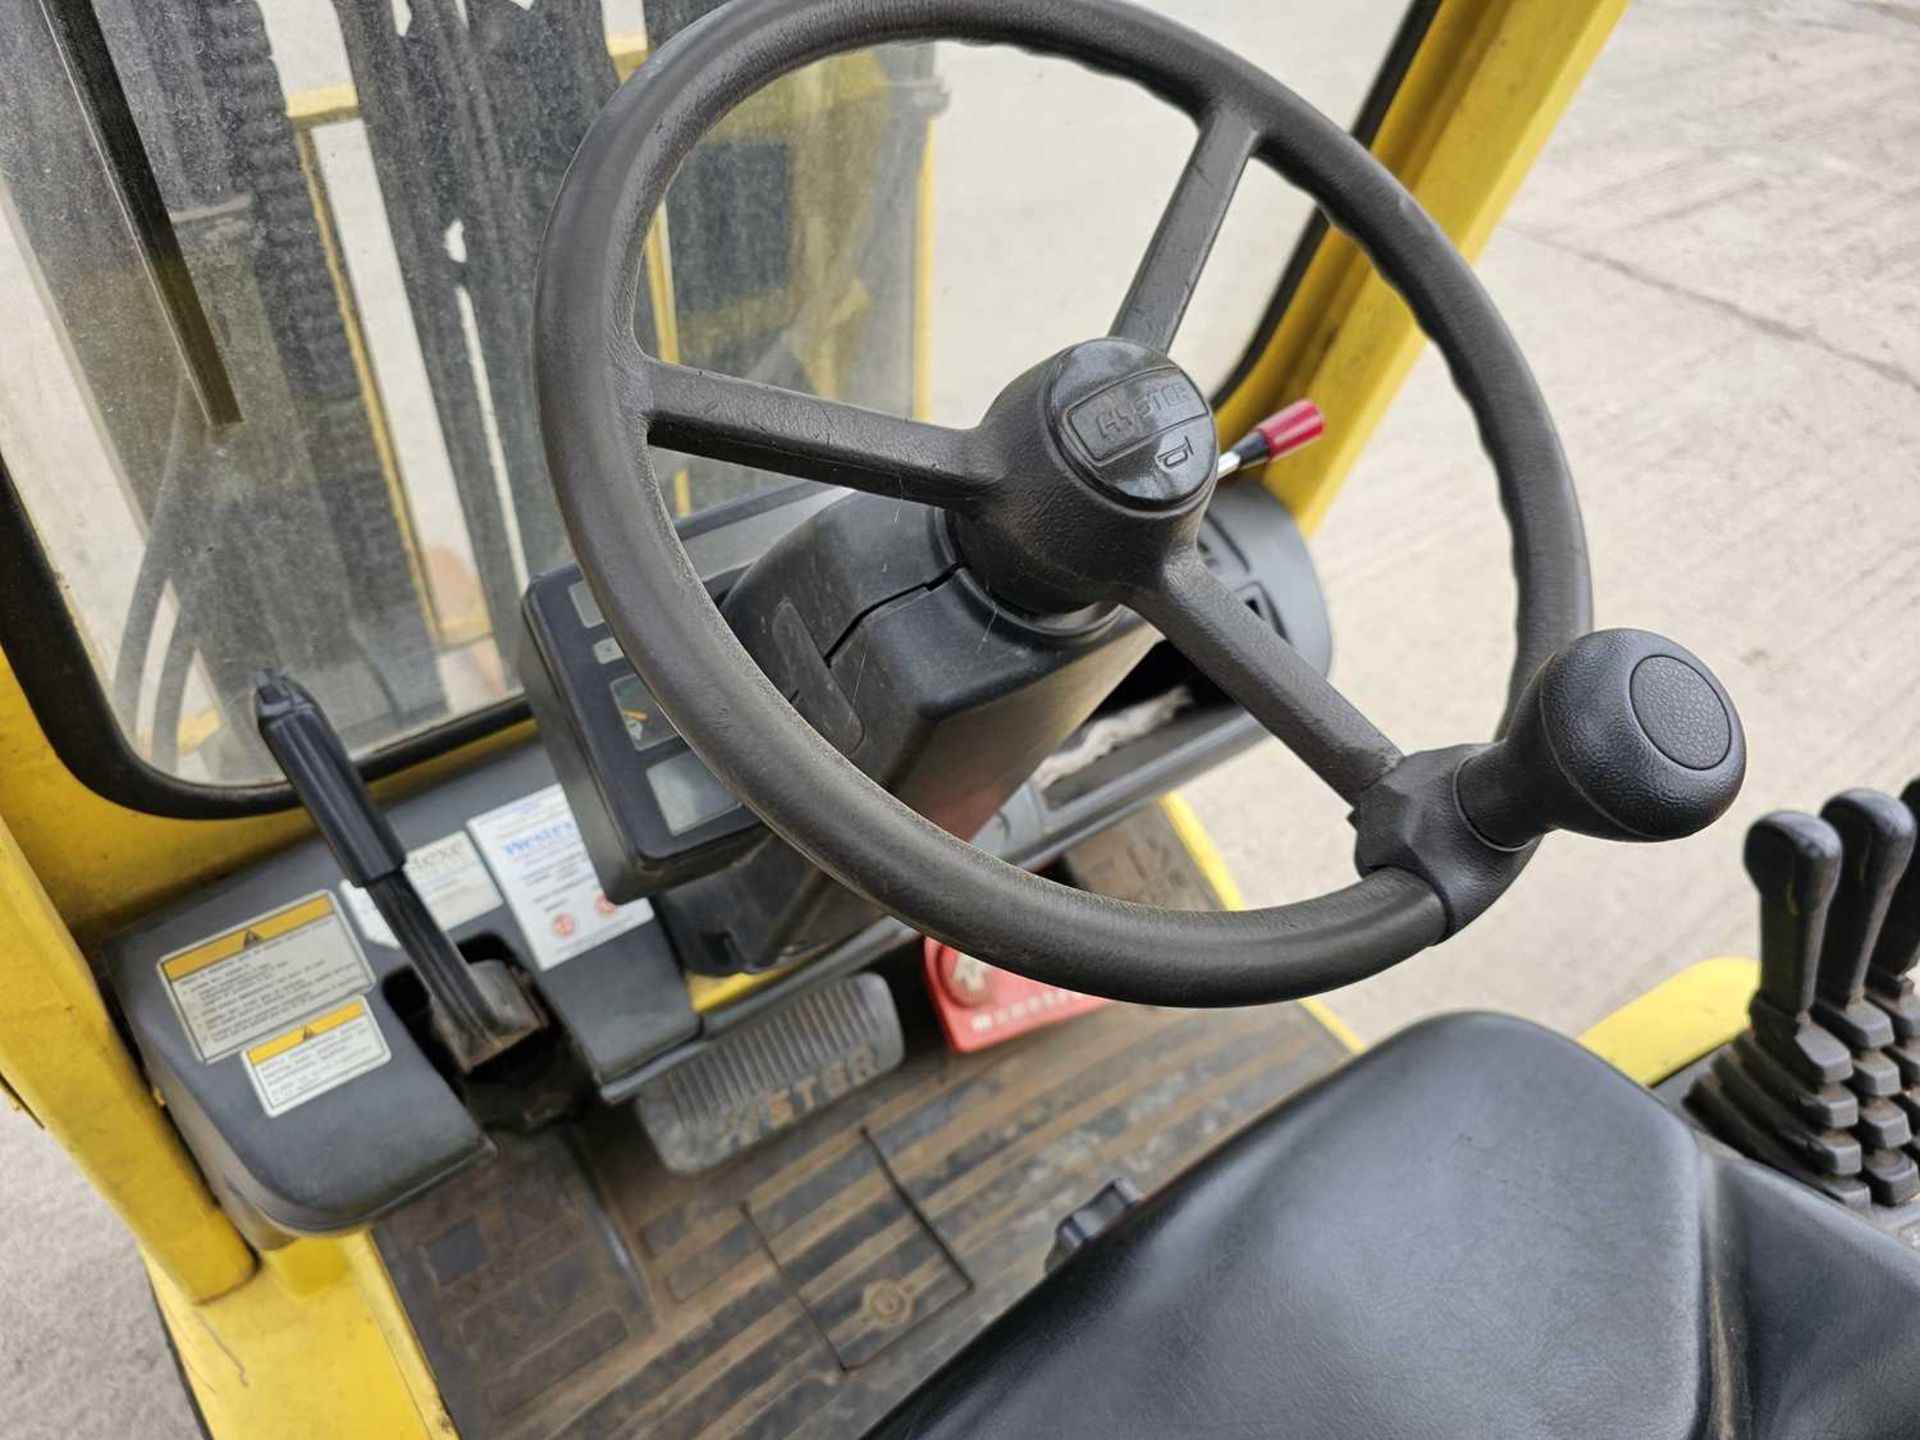 2002 Hyster S3.00XM-U Gas Forklift, 3 Stage Free Lift Mast, Side Shift, Forks (Non Runner) - Image 12 of 15